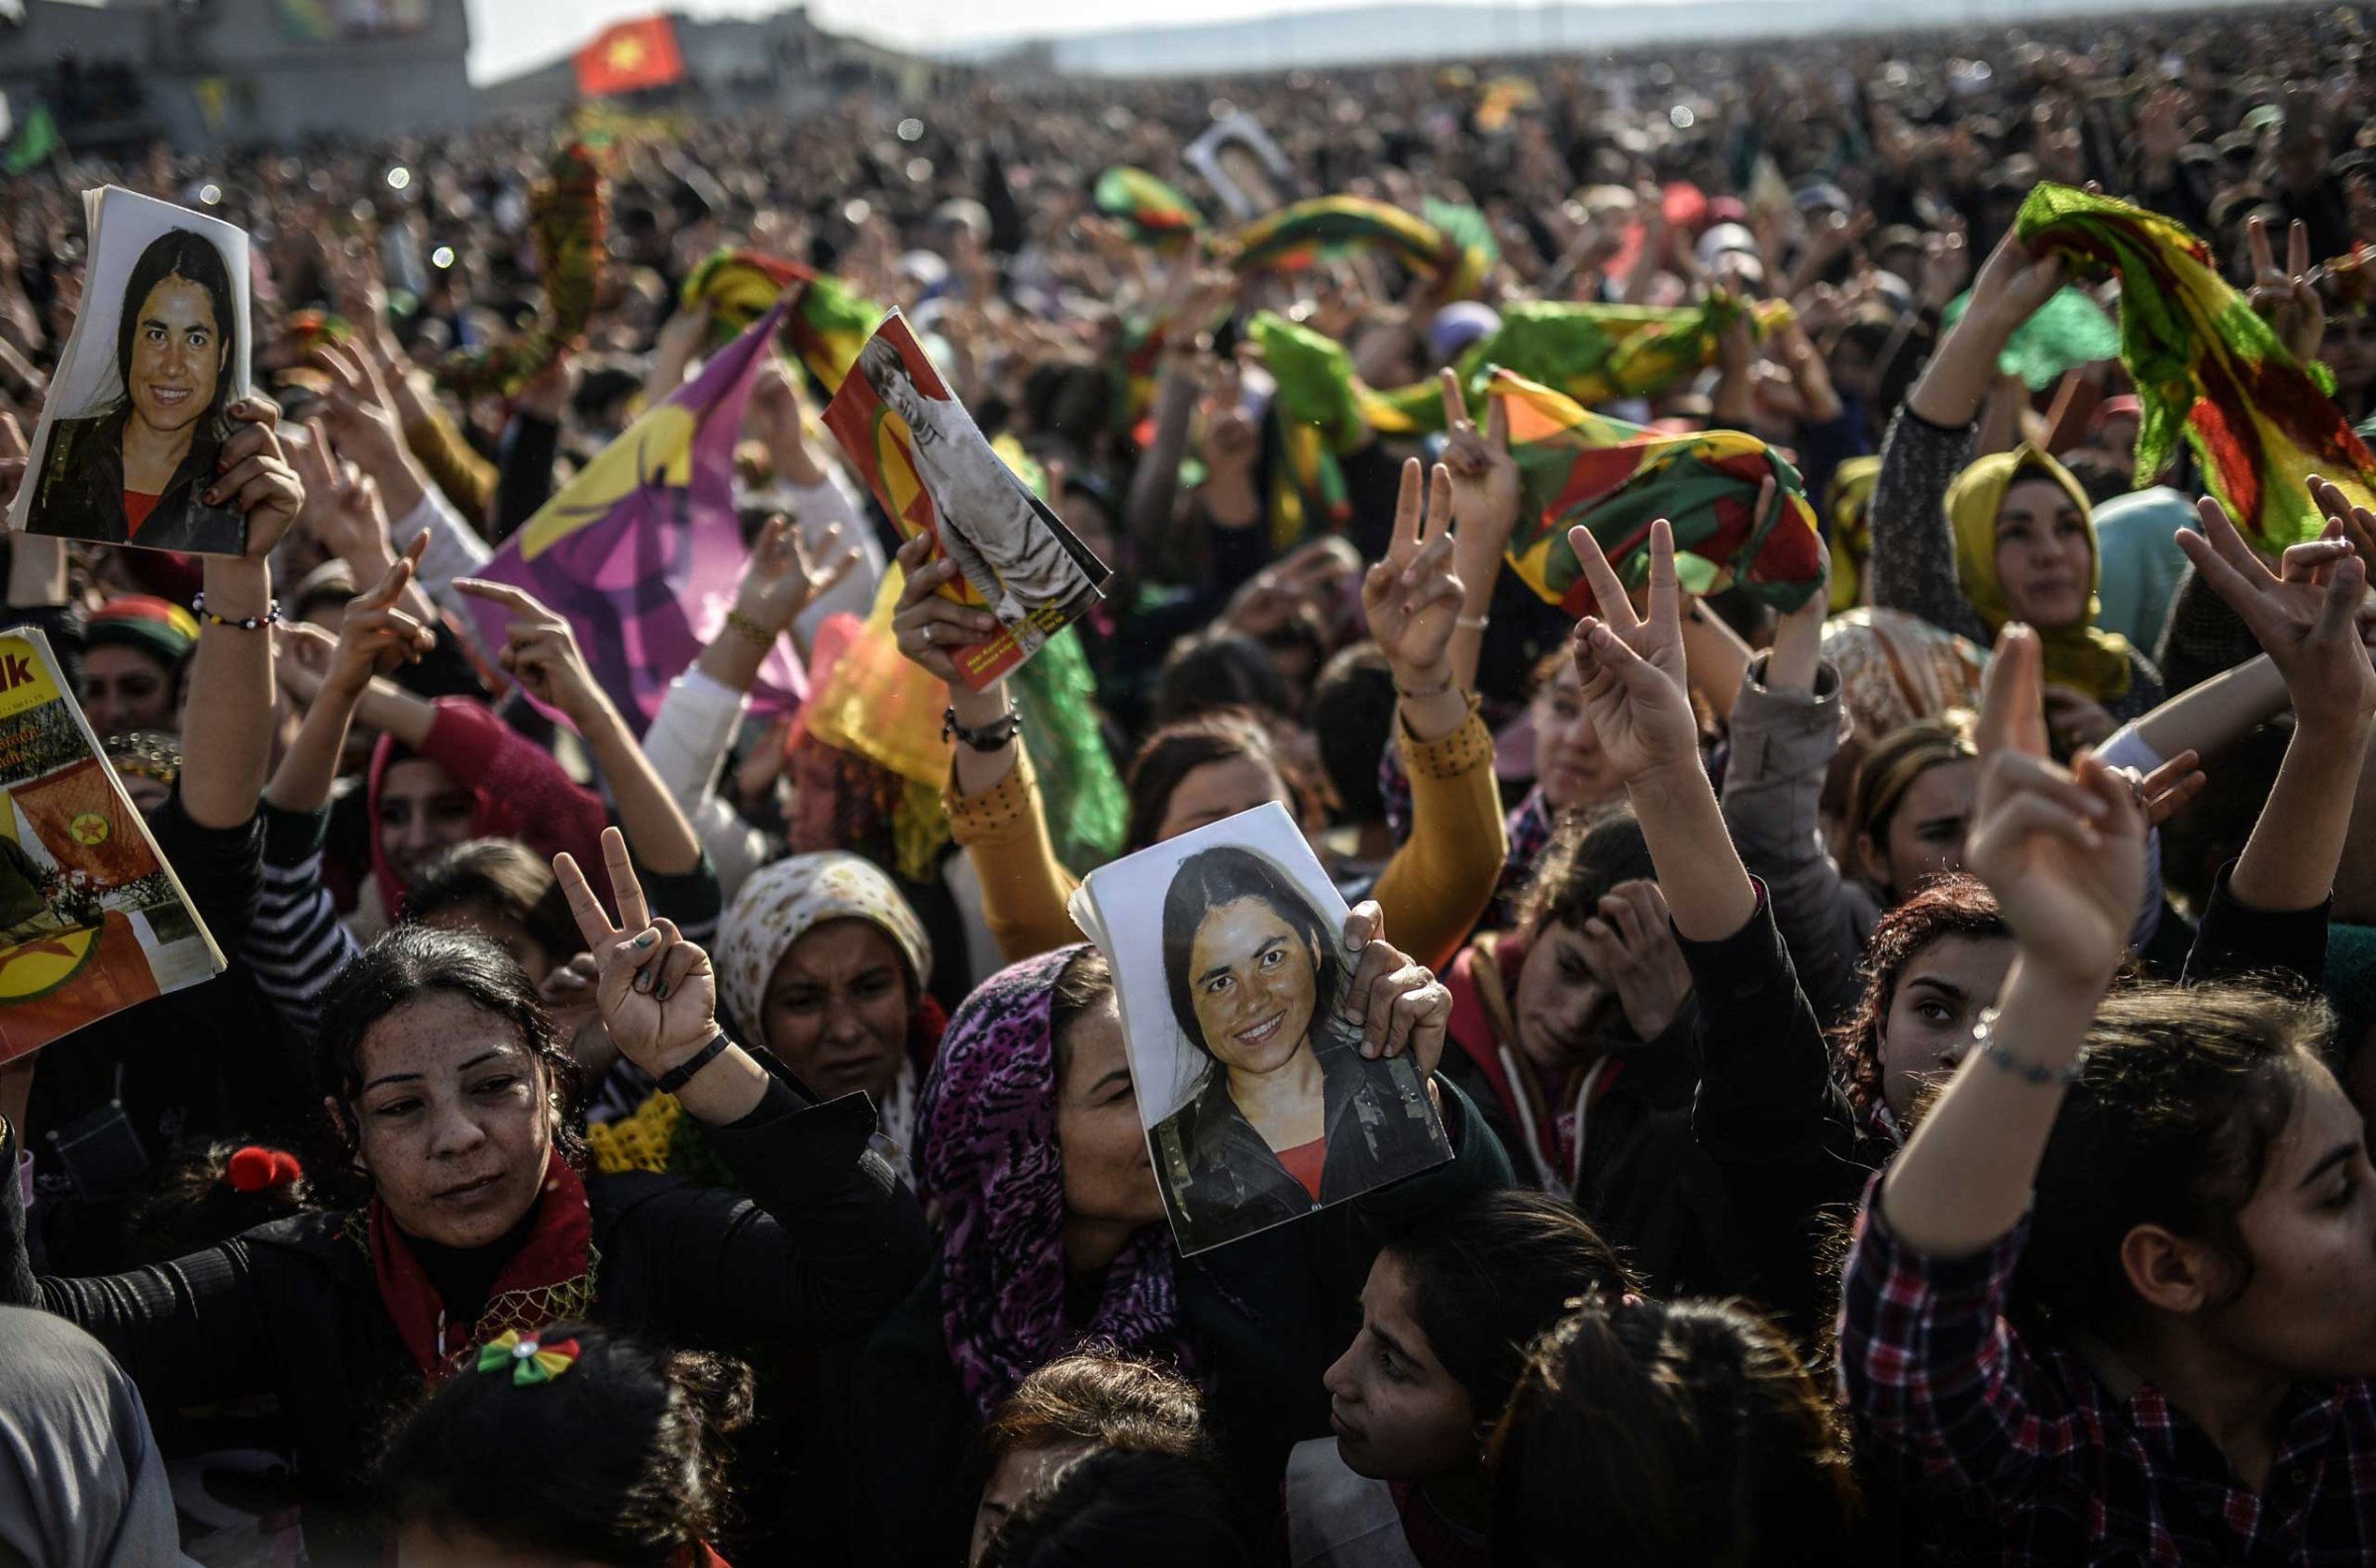 Kurdish people hold a picture of a fighter during a celebration rally near the Turkish-Syrian border at Suruc, Turkey on Jan. 27, 2015. The fighter was killed in battle with Islamic state militants in Kobani.